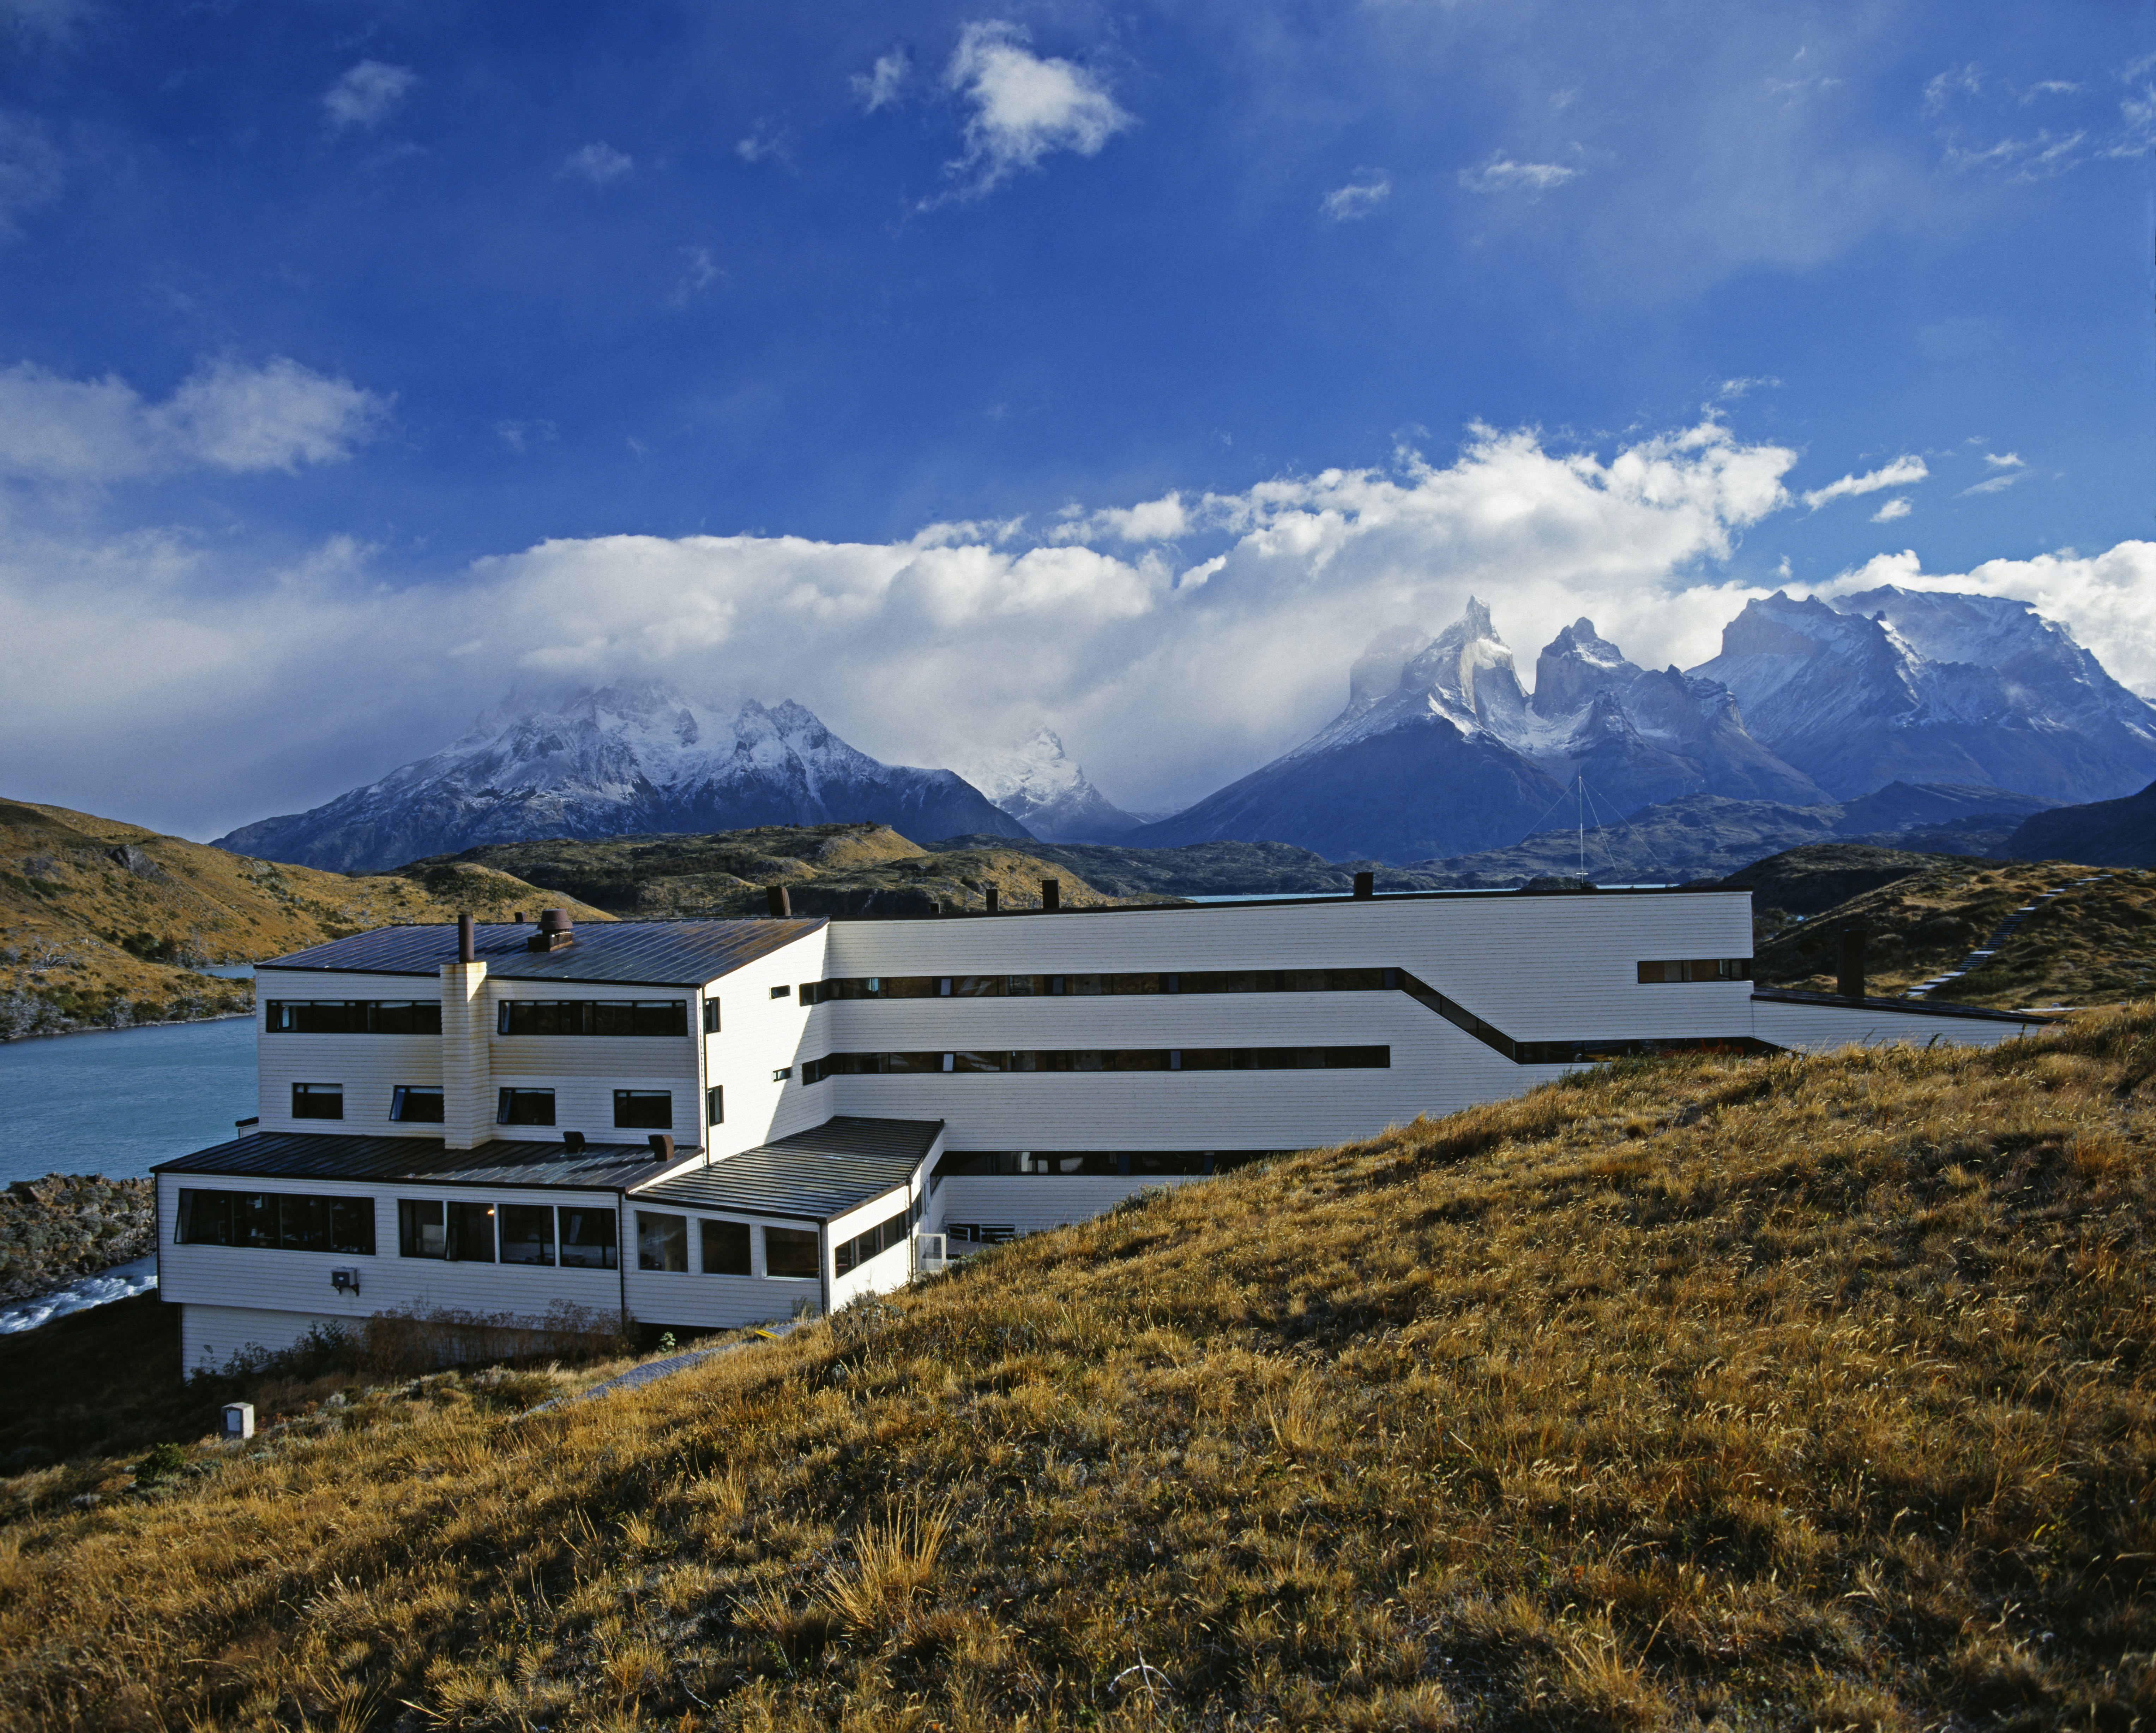 The white, modernist form of the Explora Hotel in Salto Chico Patagonia is set into a hillside covered in greenish yellow scrub. In the distance, you see the Paine Massif and a glacial lake which the hotel overlooks, under a deep blue sky and white lines of clouds.